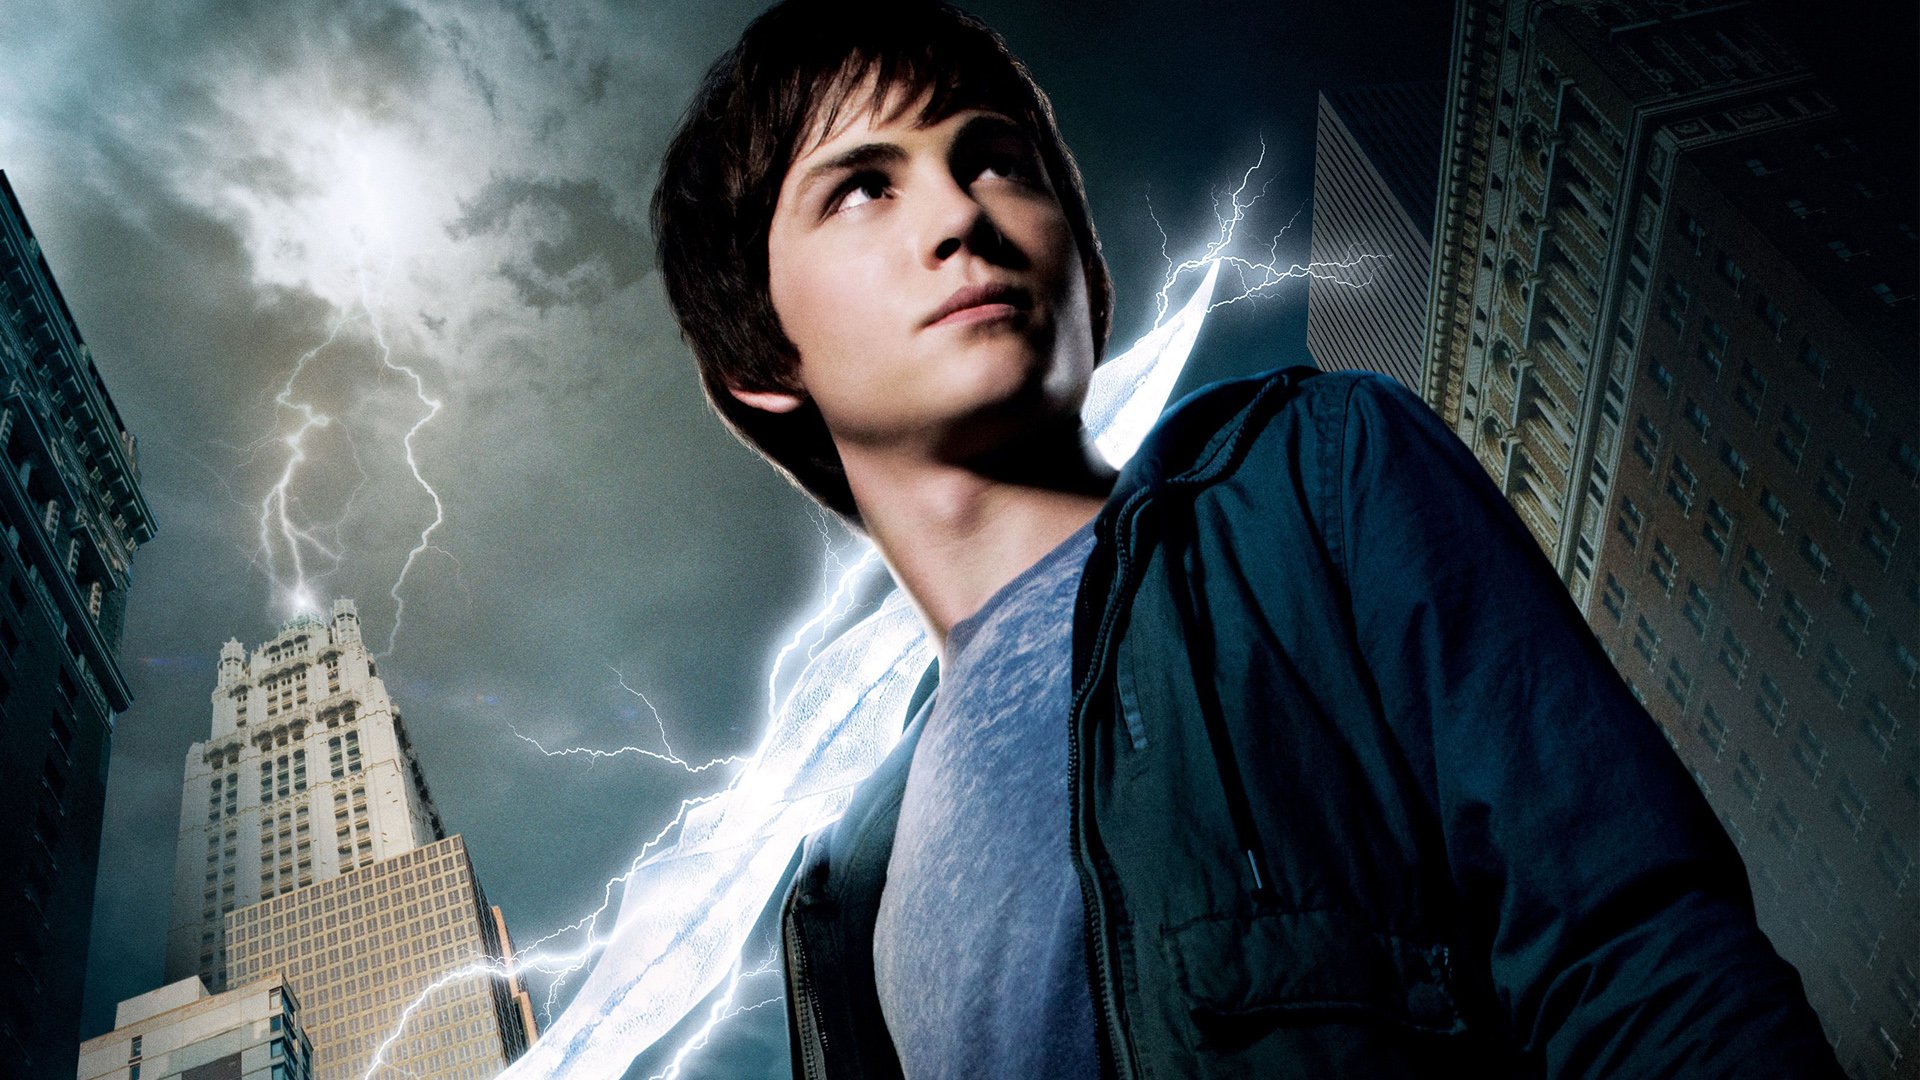 Percy Jackson & The Olympians: The Lightning Thief Wallpapers